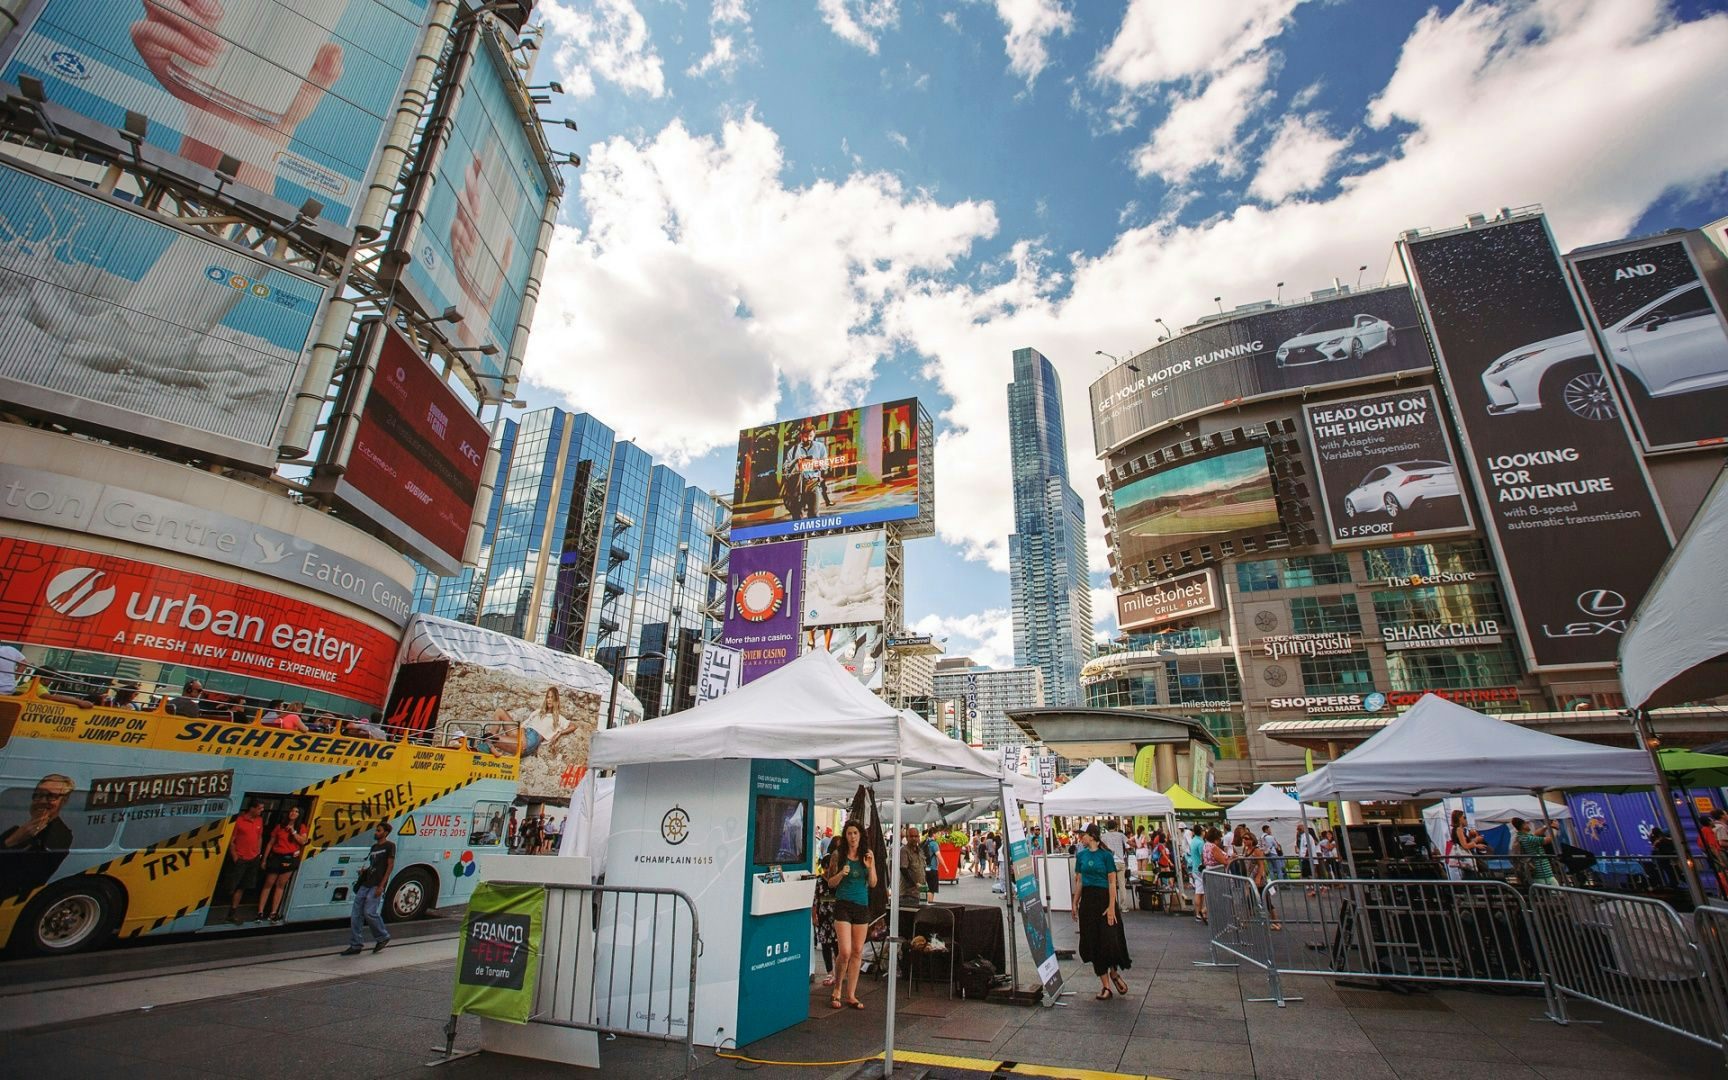 Champlain1615 branded interactive booth at Yonge and Dundas in Toronto, Ontario